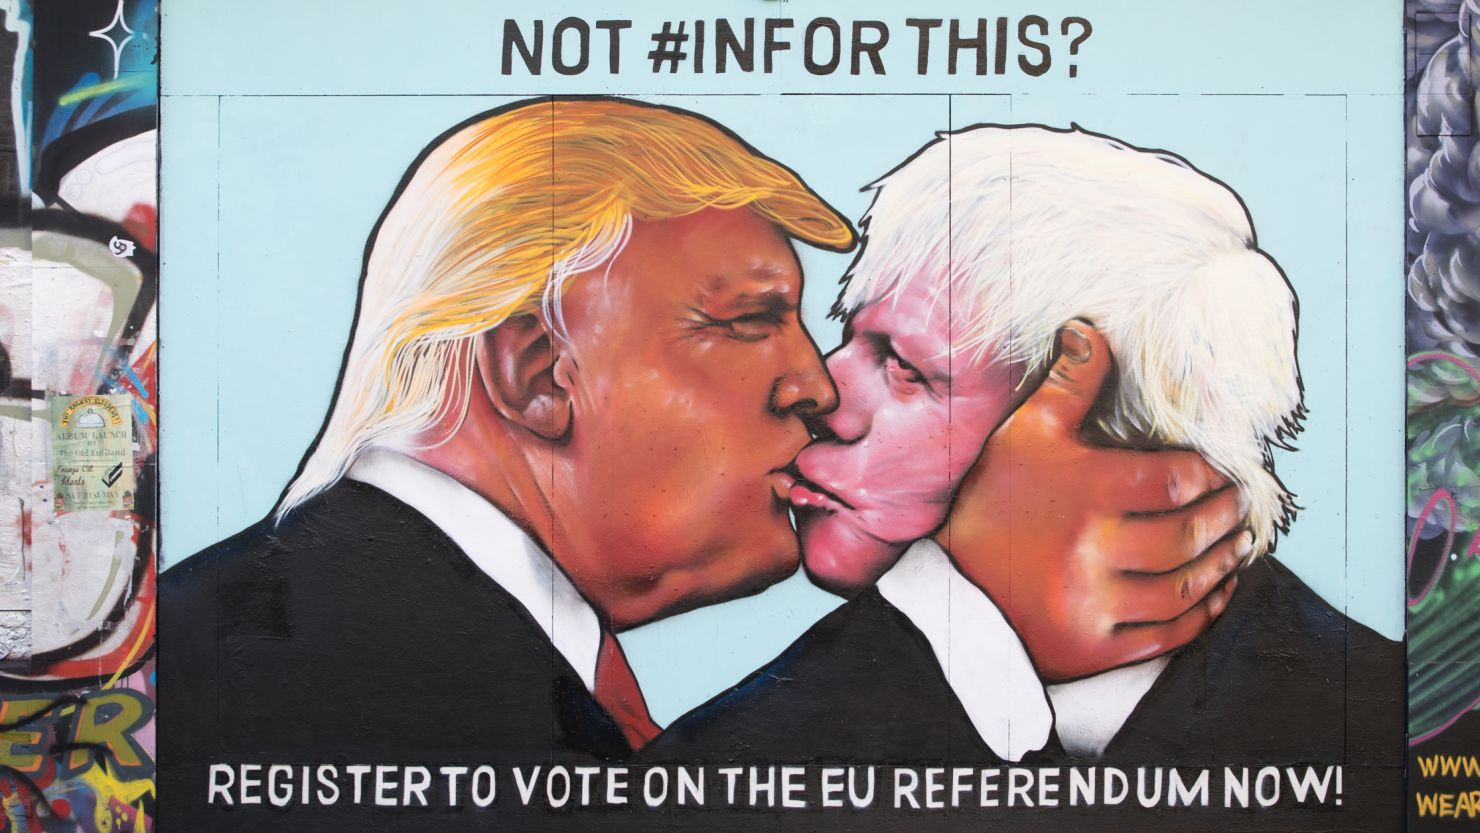  A mural in Bristol, England, before the UK's Brexit vote depicts Donald Trump kissing Boris Johnson.